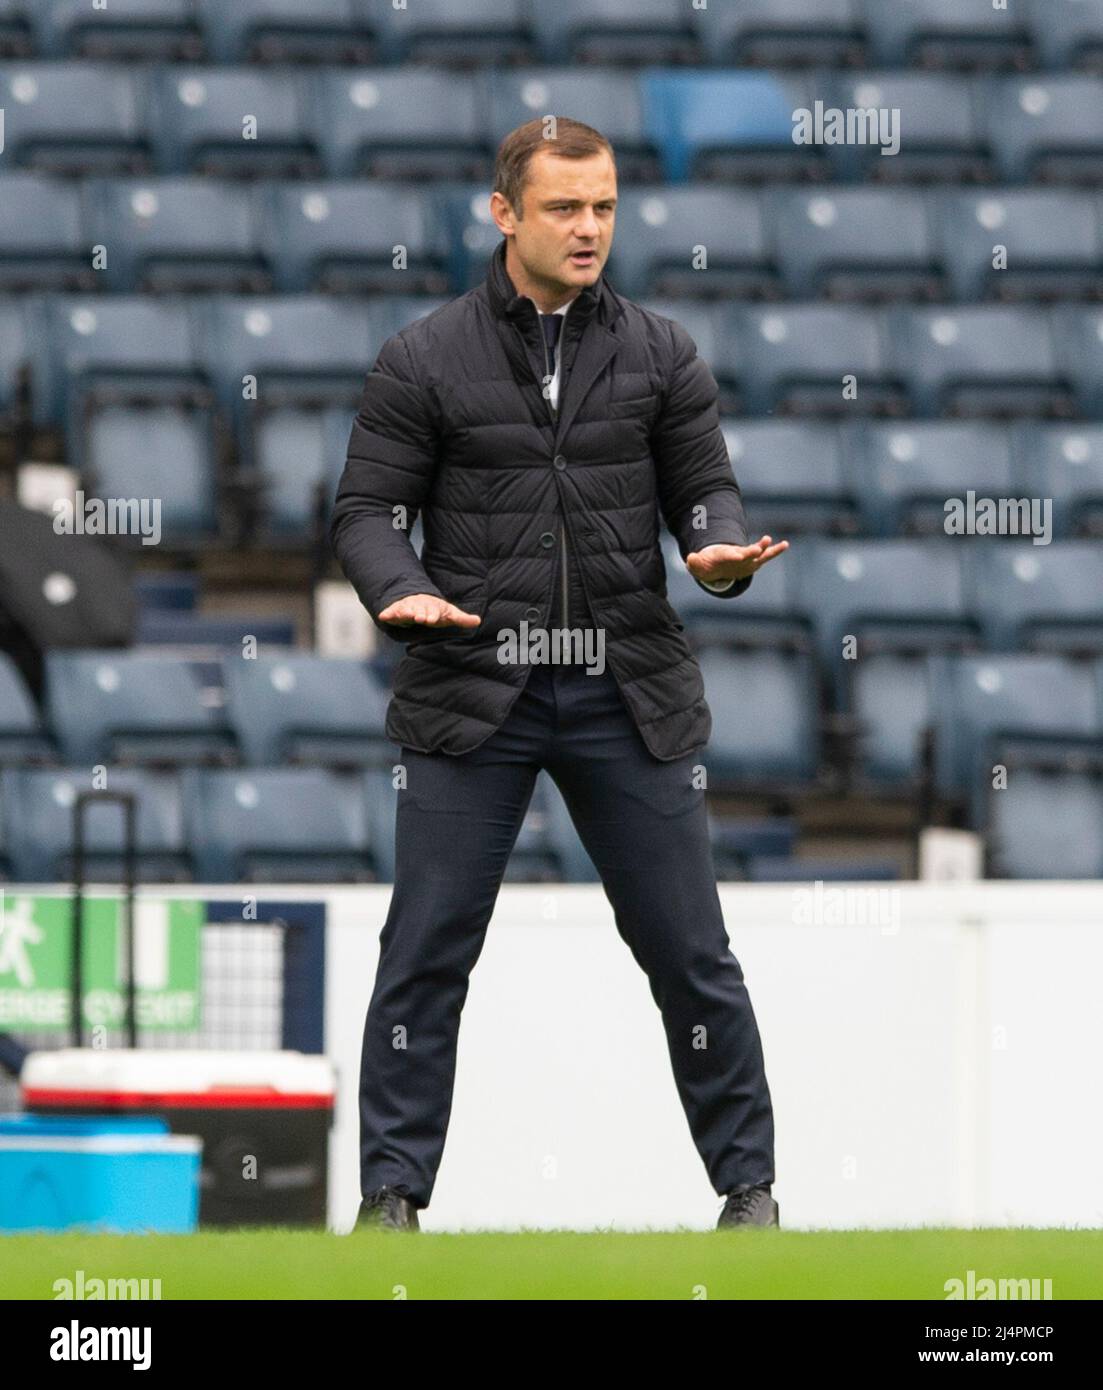 Glasgow, UK. 07th Apr, 2022. Scottish Cup semi final - Heart of Midlothian FC v Hibernian FC 07/04/2022 Pic shows: HibsÕ Manager, Shaun Maloney, instructs his team to calm things down as Hearts take on Hibs in the Scottish Cup semi final at Hampden Park, Glasgow Credit: Ian Jacobs/Alamy Live News Stock Photo